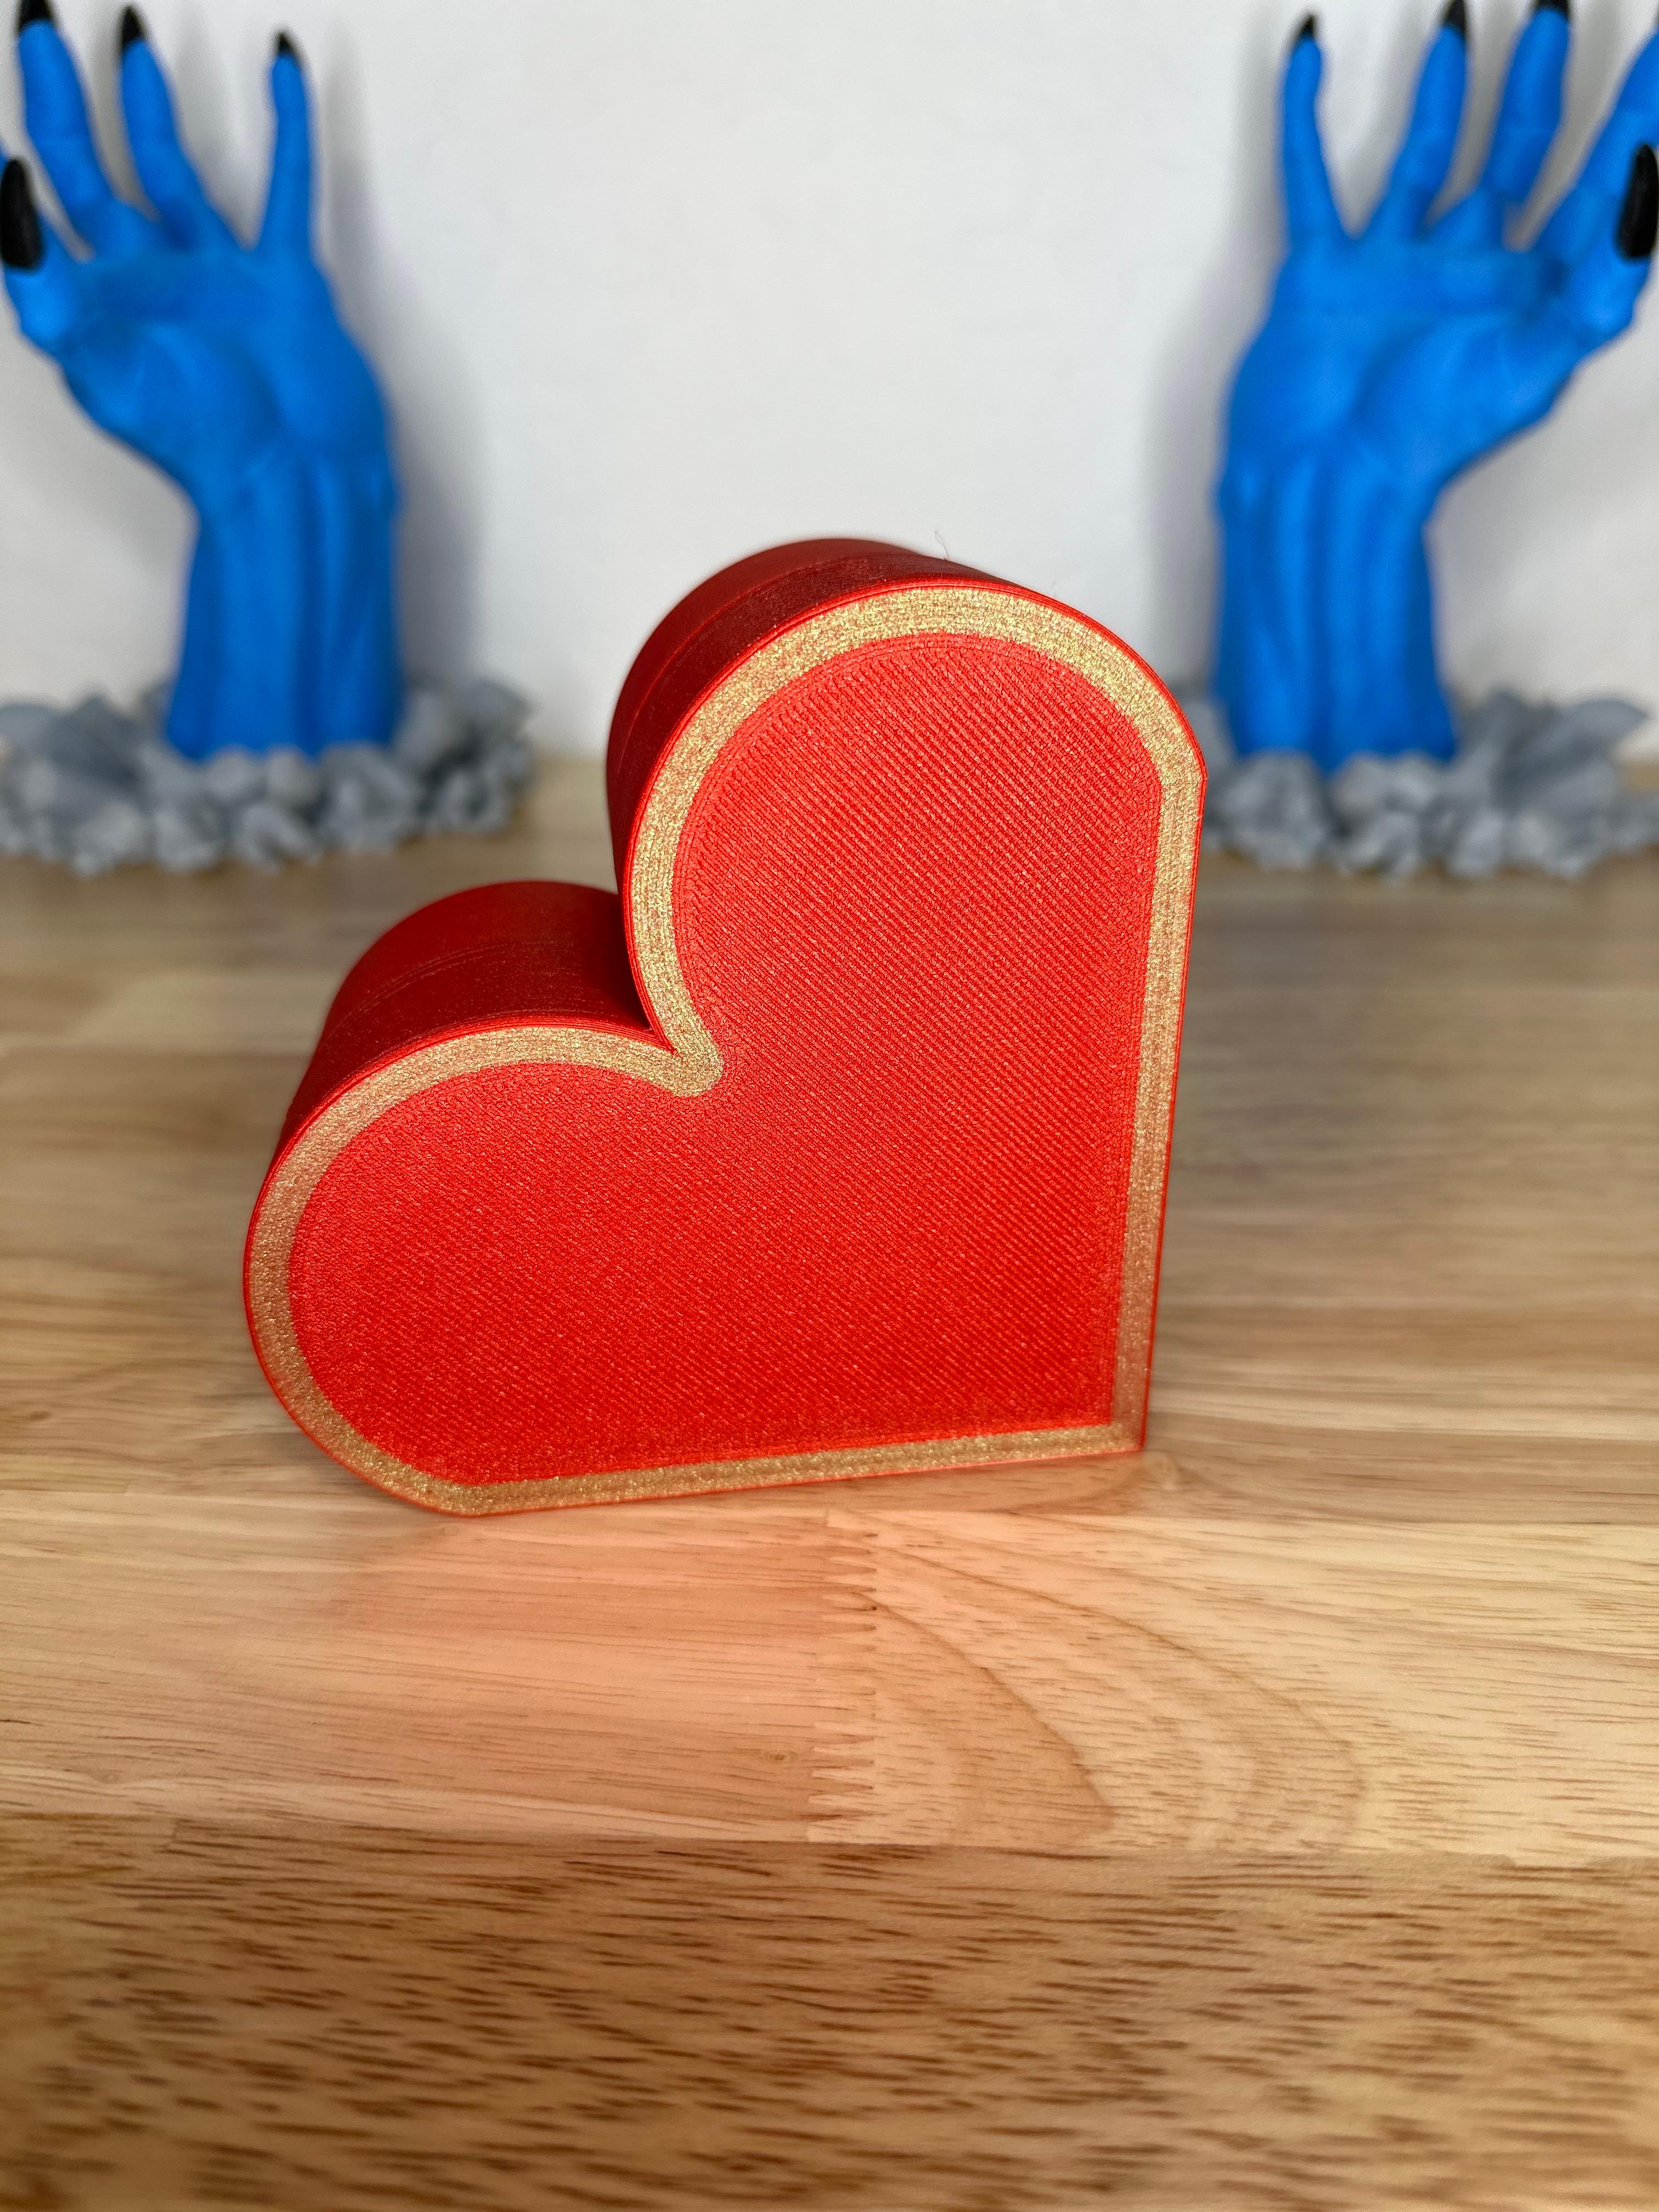 NEW Print in Place Valentine's Day Heart Box 3d model